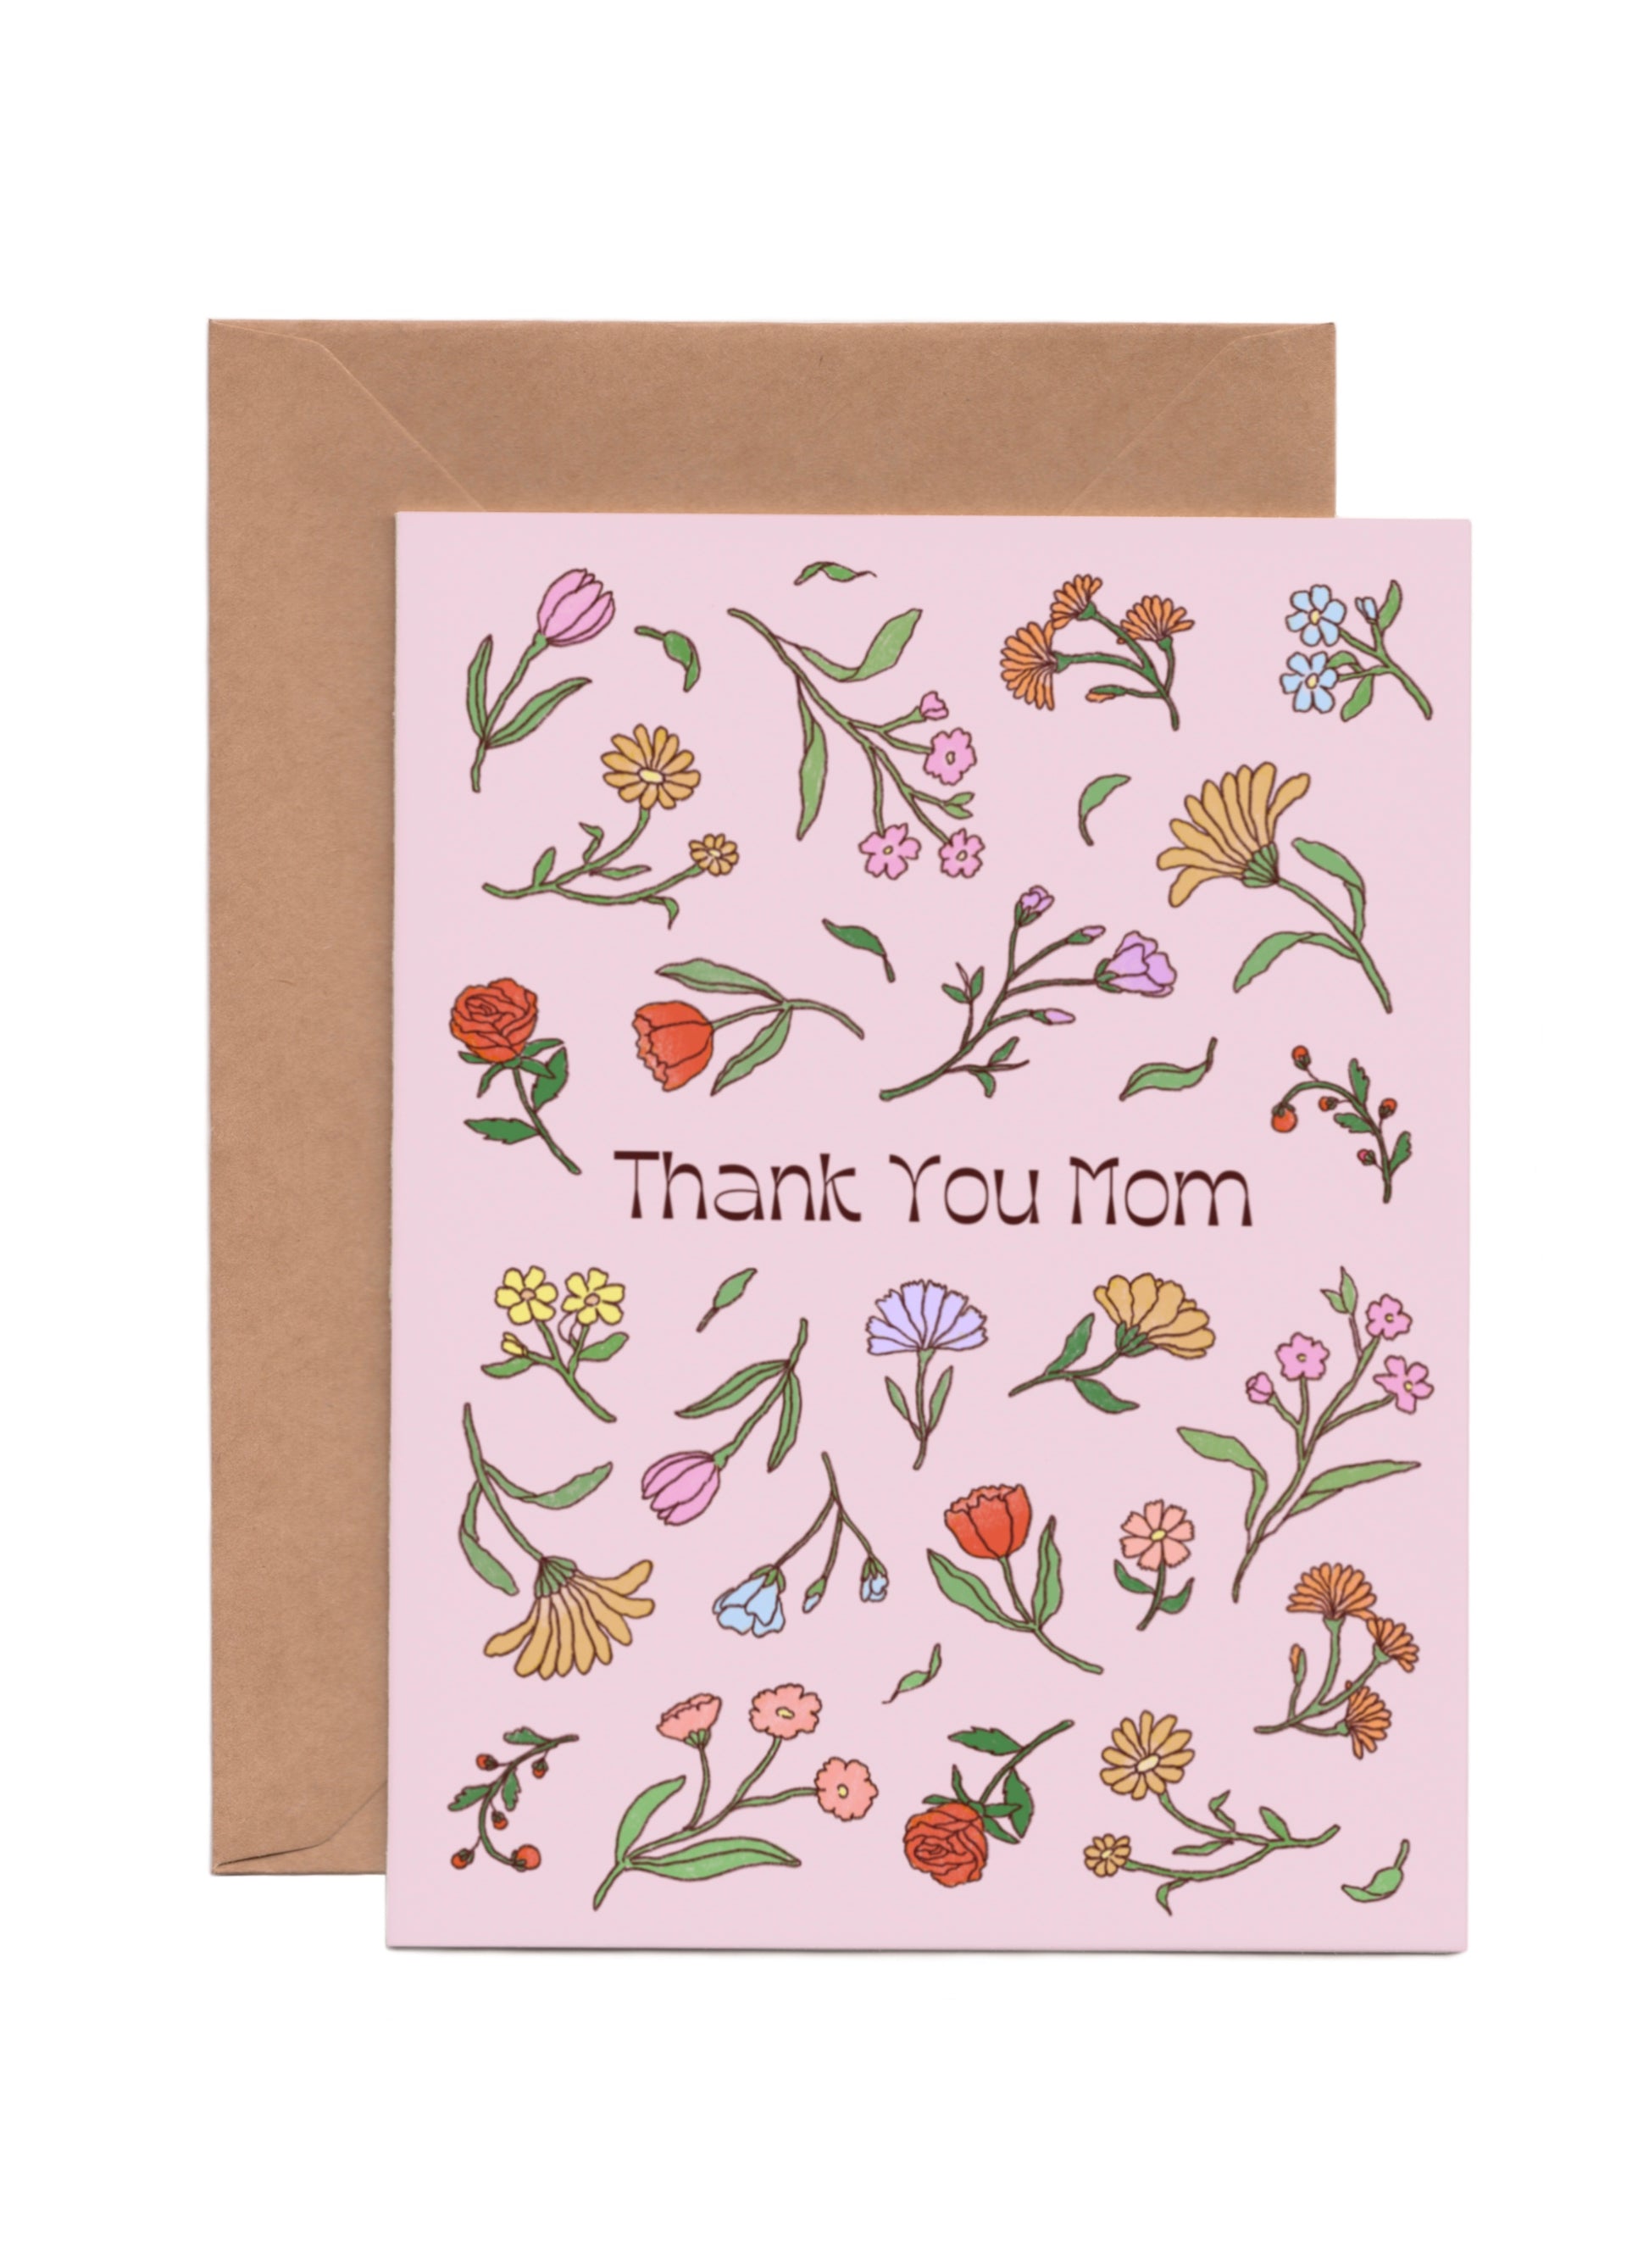 A classic floral card for mothers with the text "Thank you Mom" and the illustration of colourful flowers